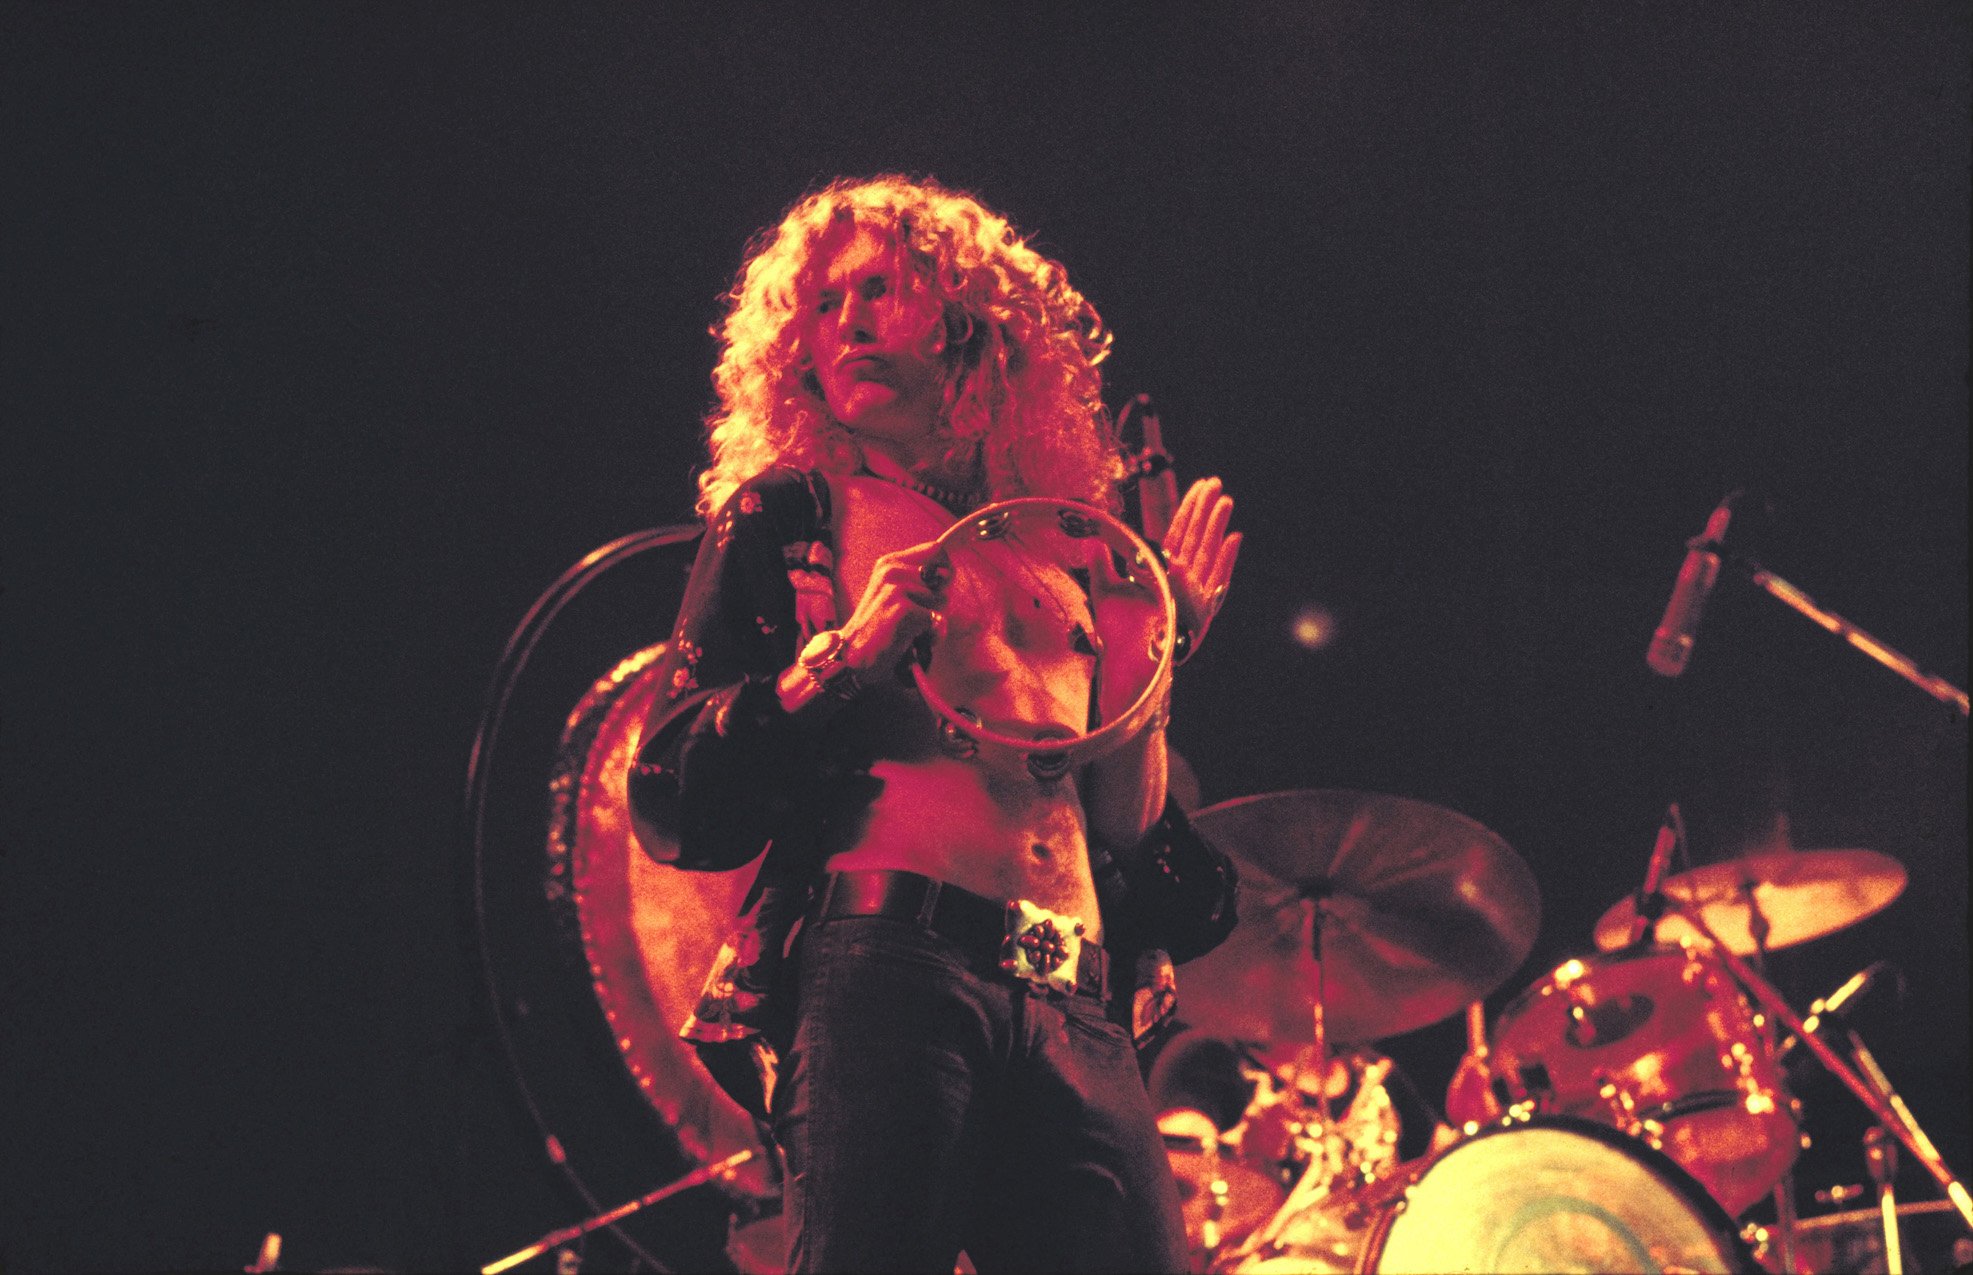 Robert Plant with Led Zeppelin in 1975